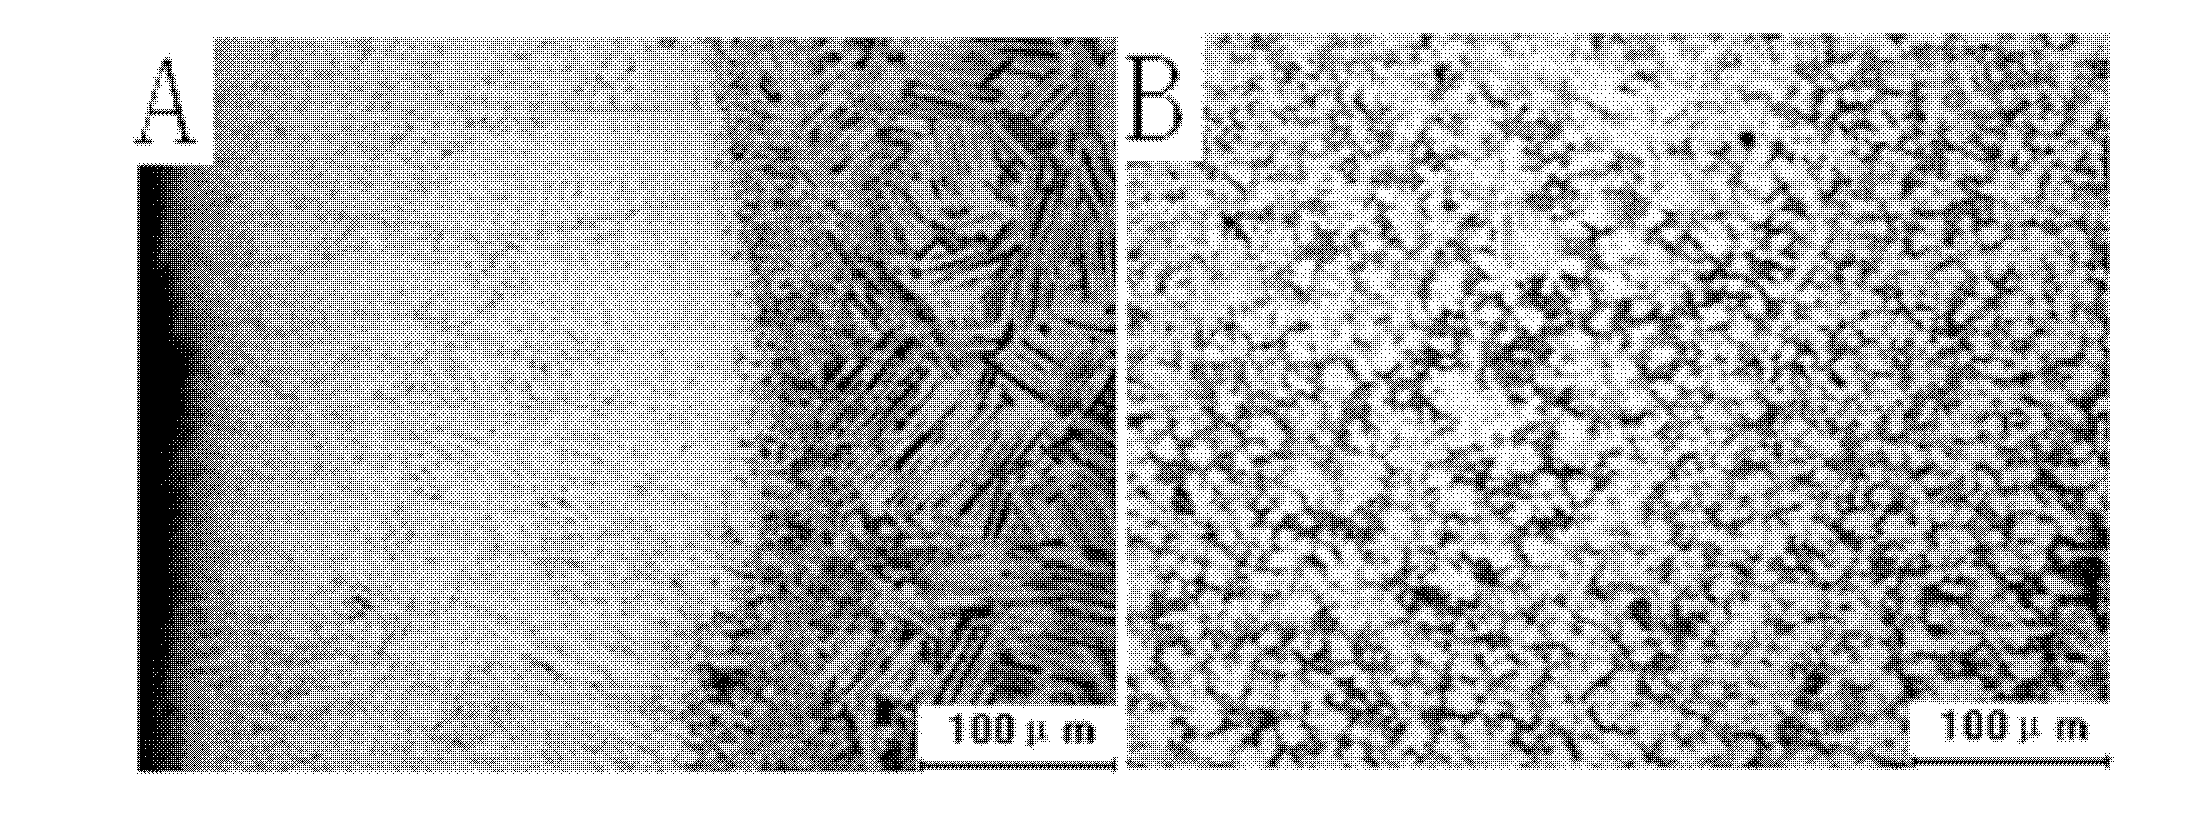 Method for performing diffusion welding of aluminum base alloy and titanium alloy after laser melting